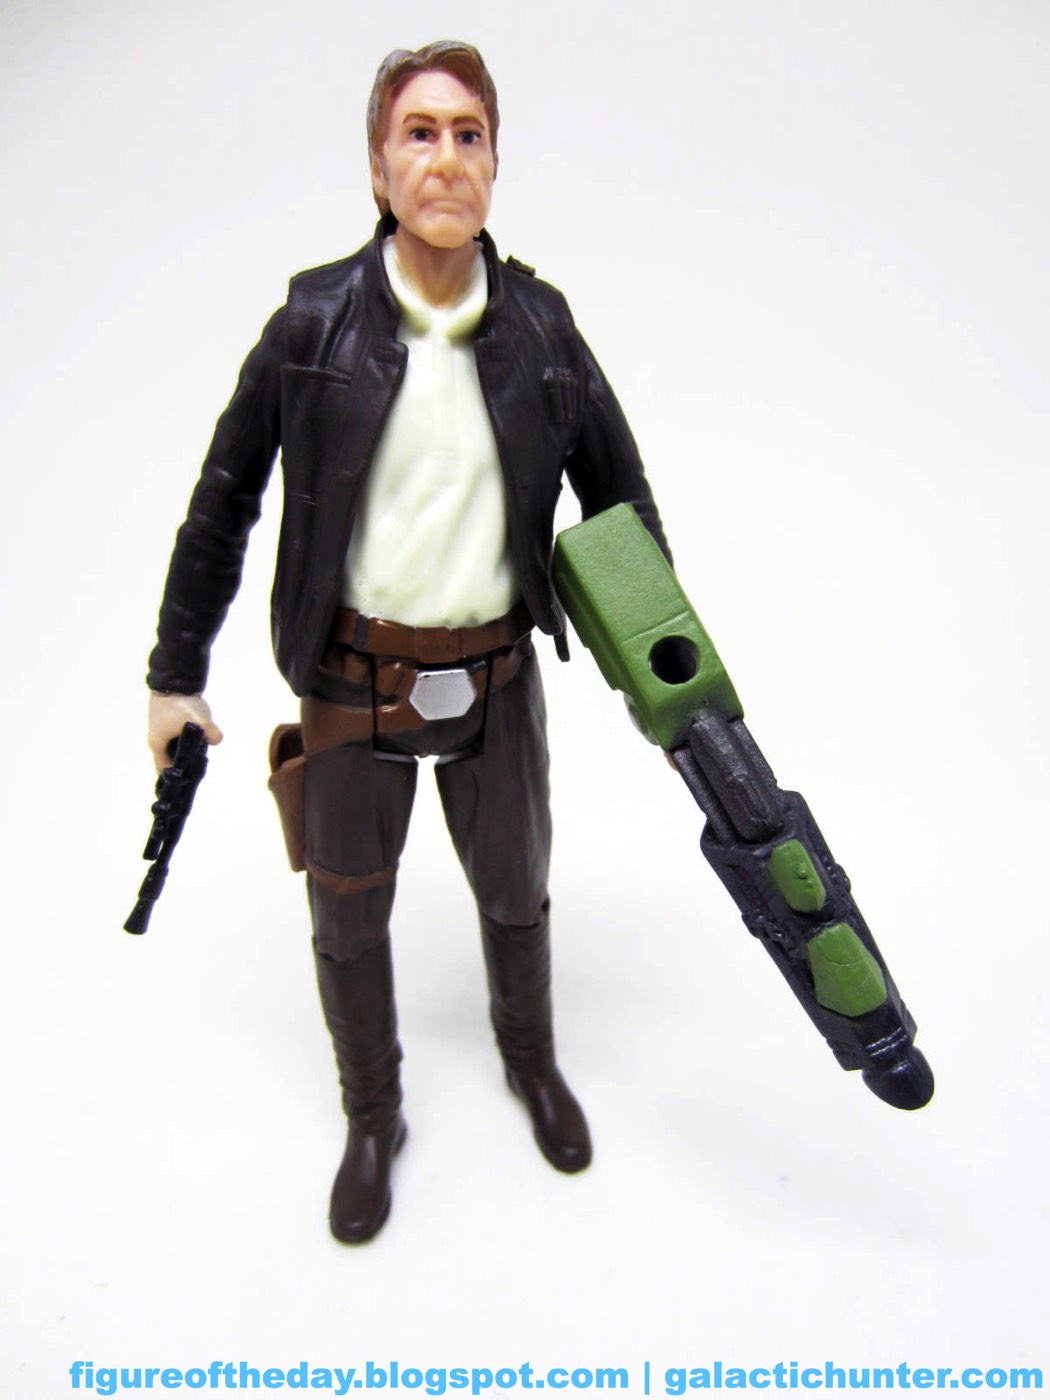 B5666 Star Wars The Force Awakens HAN SOLO 3.75" Inch Action Figure by Hasbro